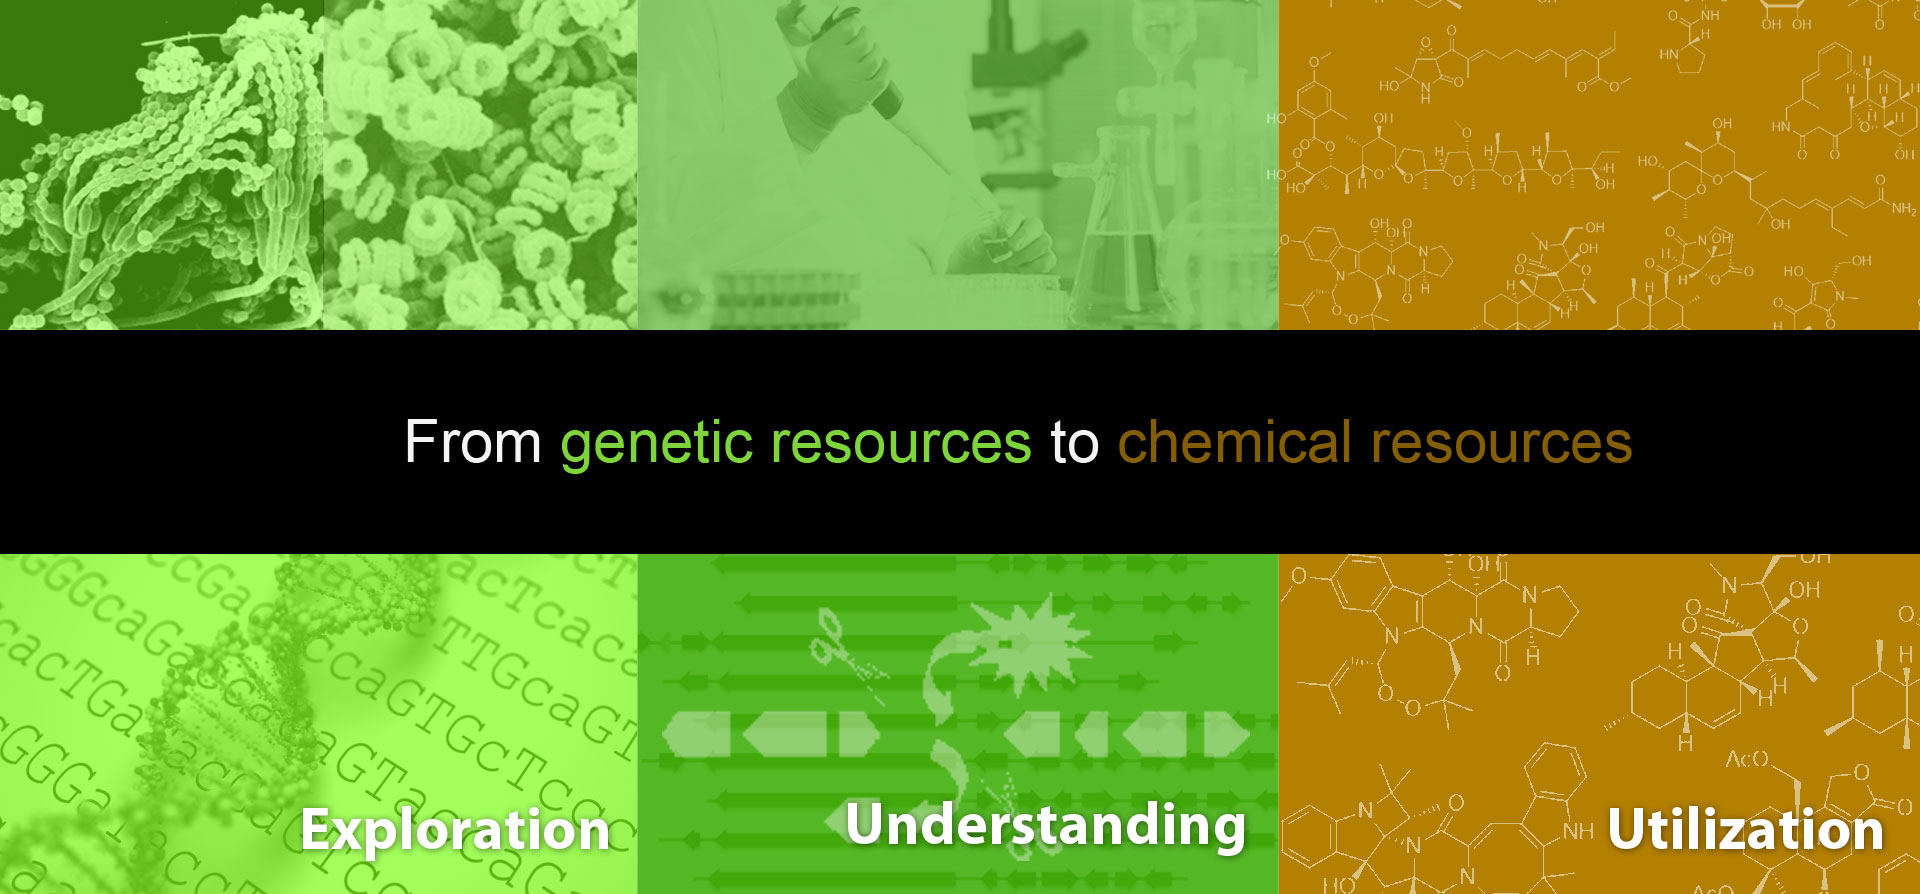 From genetic resources to chemical resources